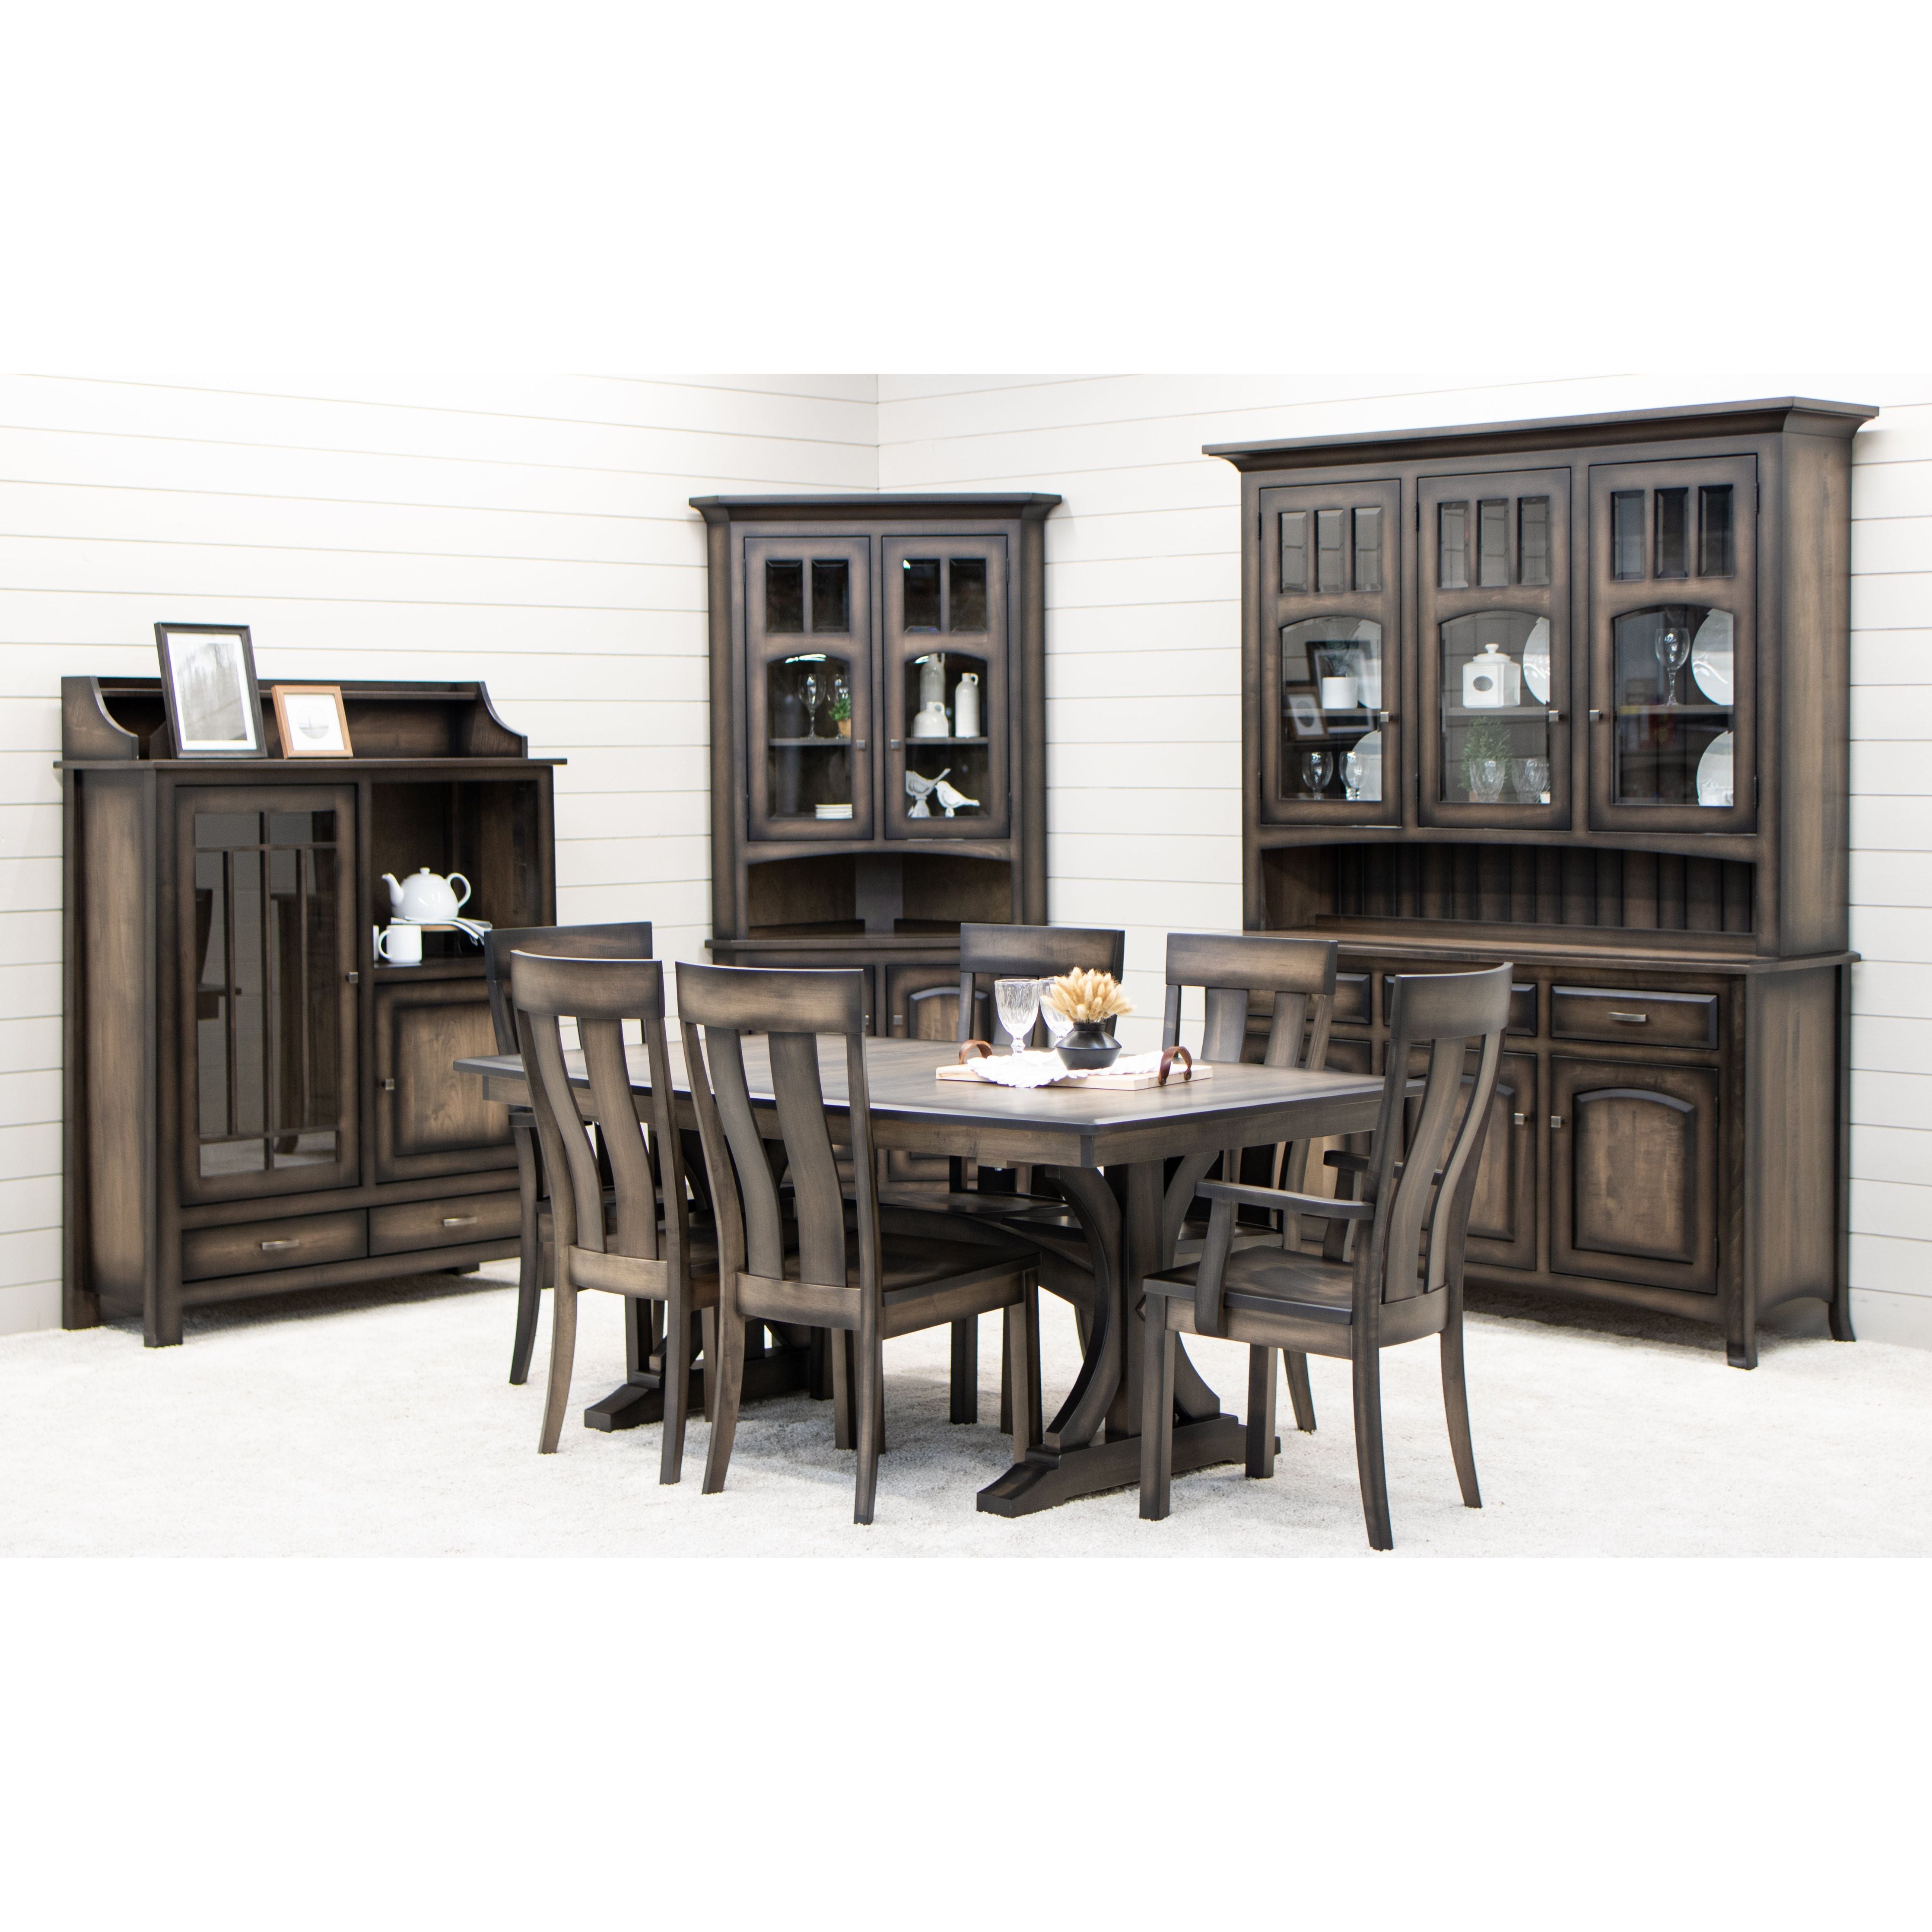 Custom Furniture Cleveland Homes & Offices